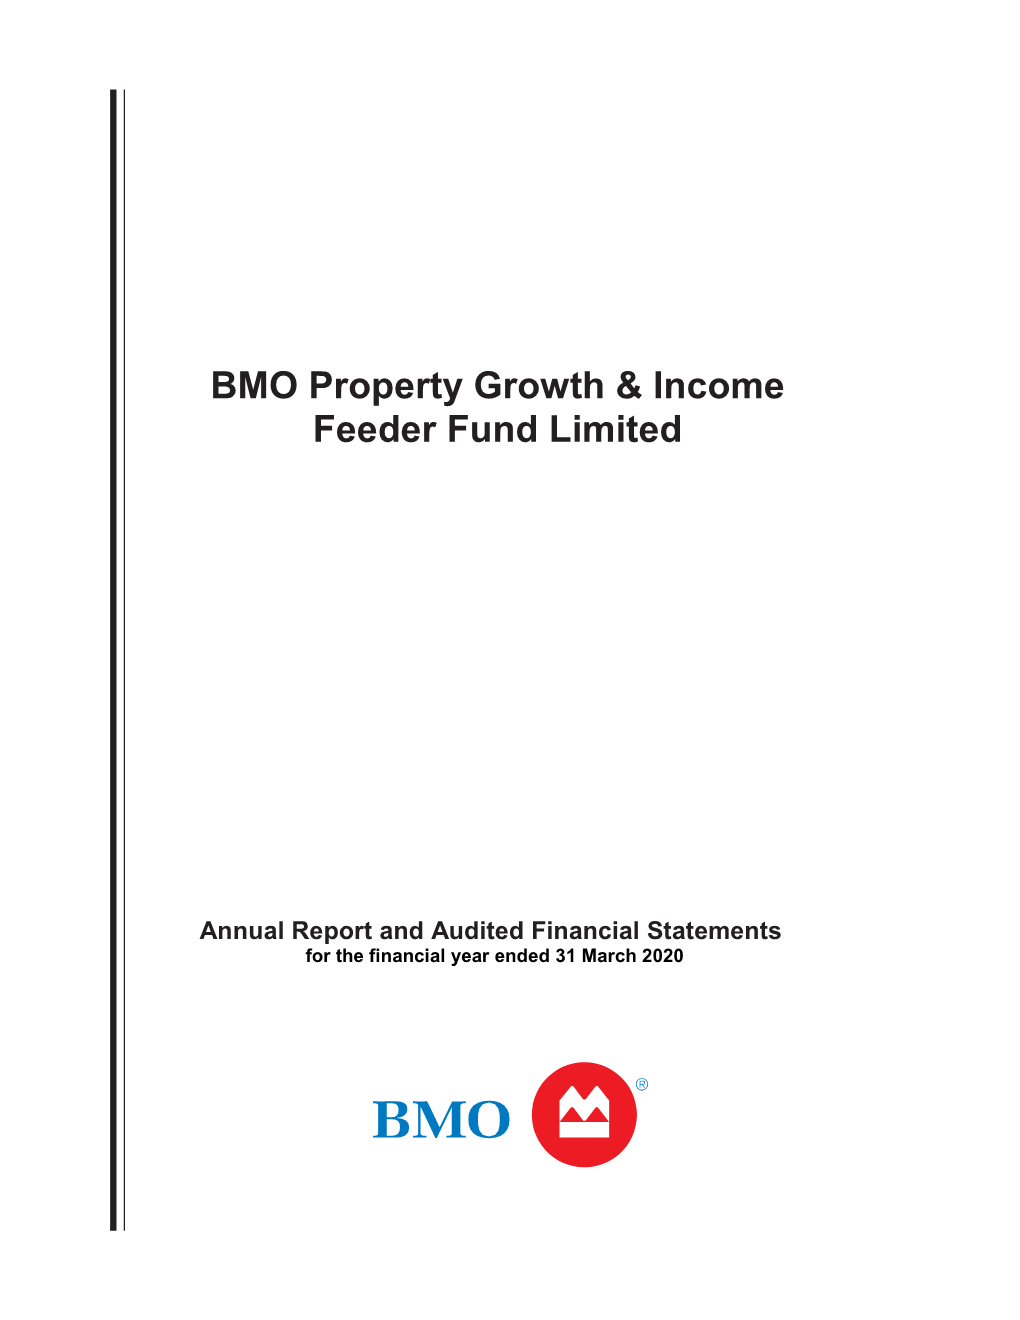 BMO Property Growth & Income Feeder Fund Limited